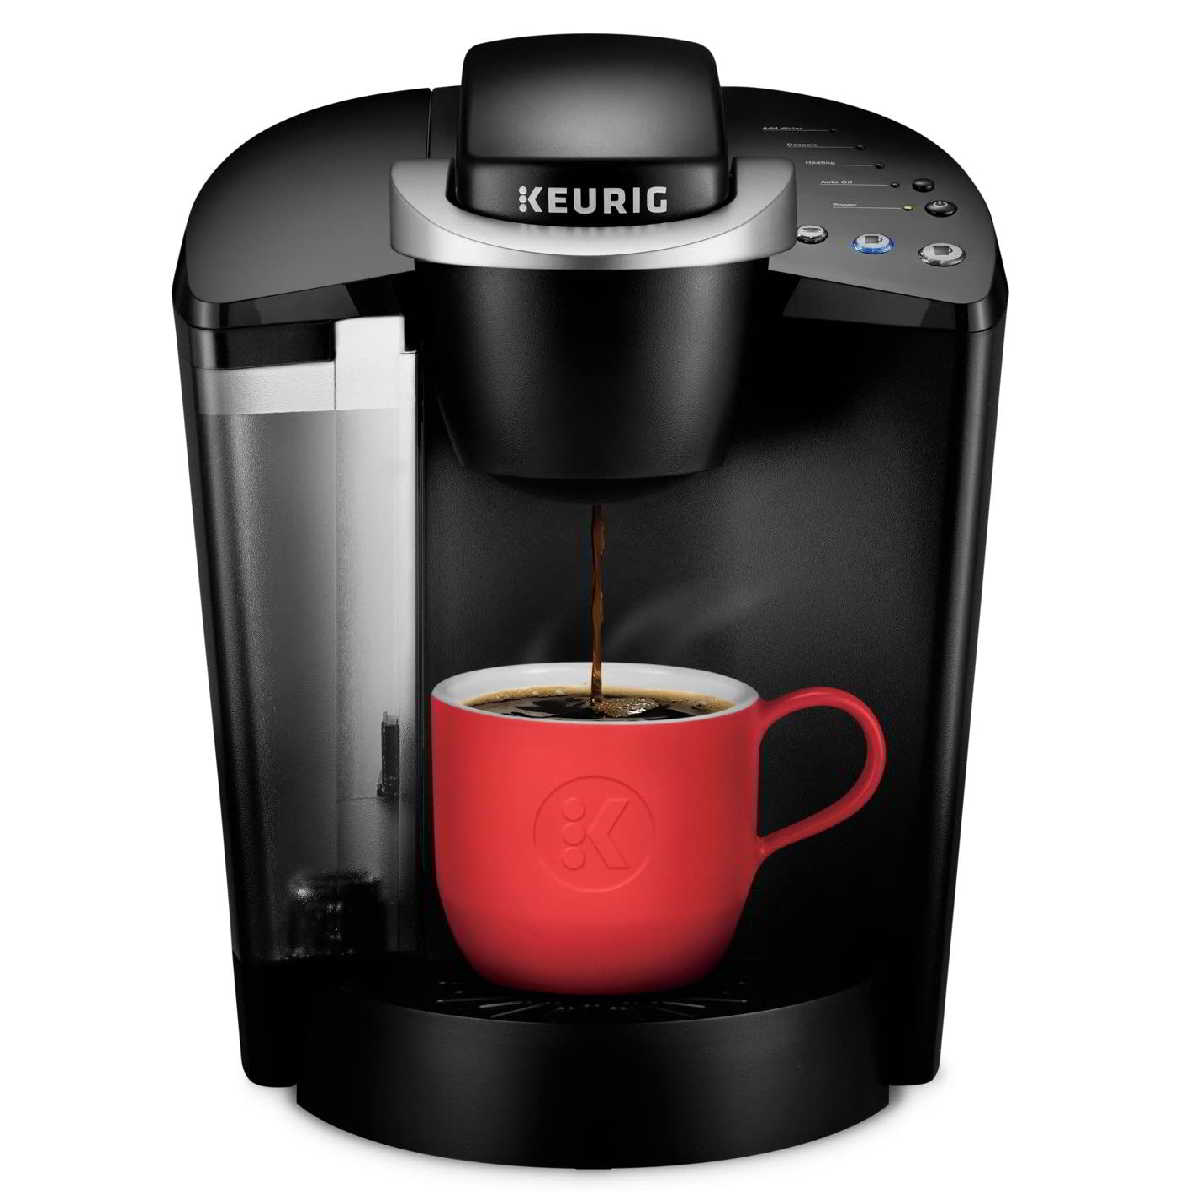 Keurig stopped working after descaling